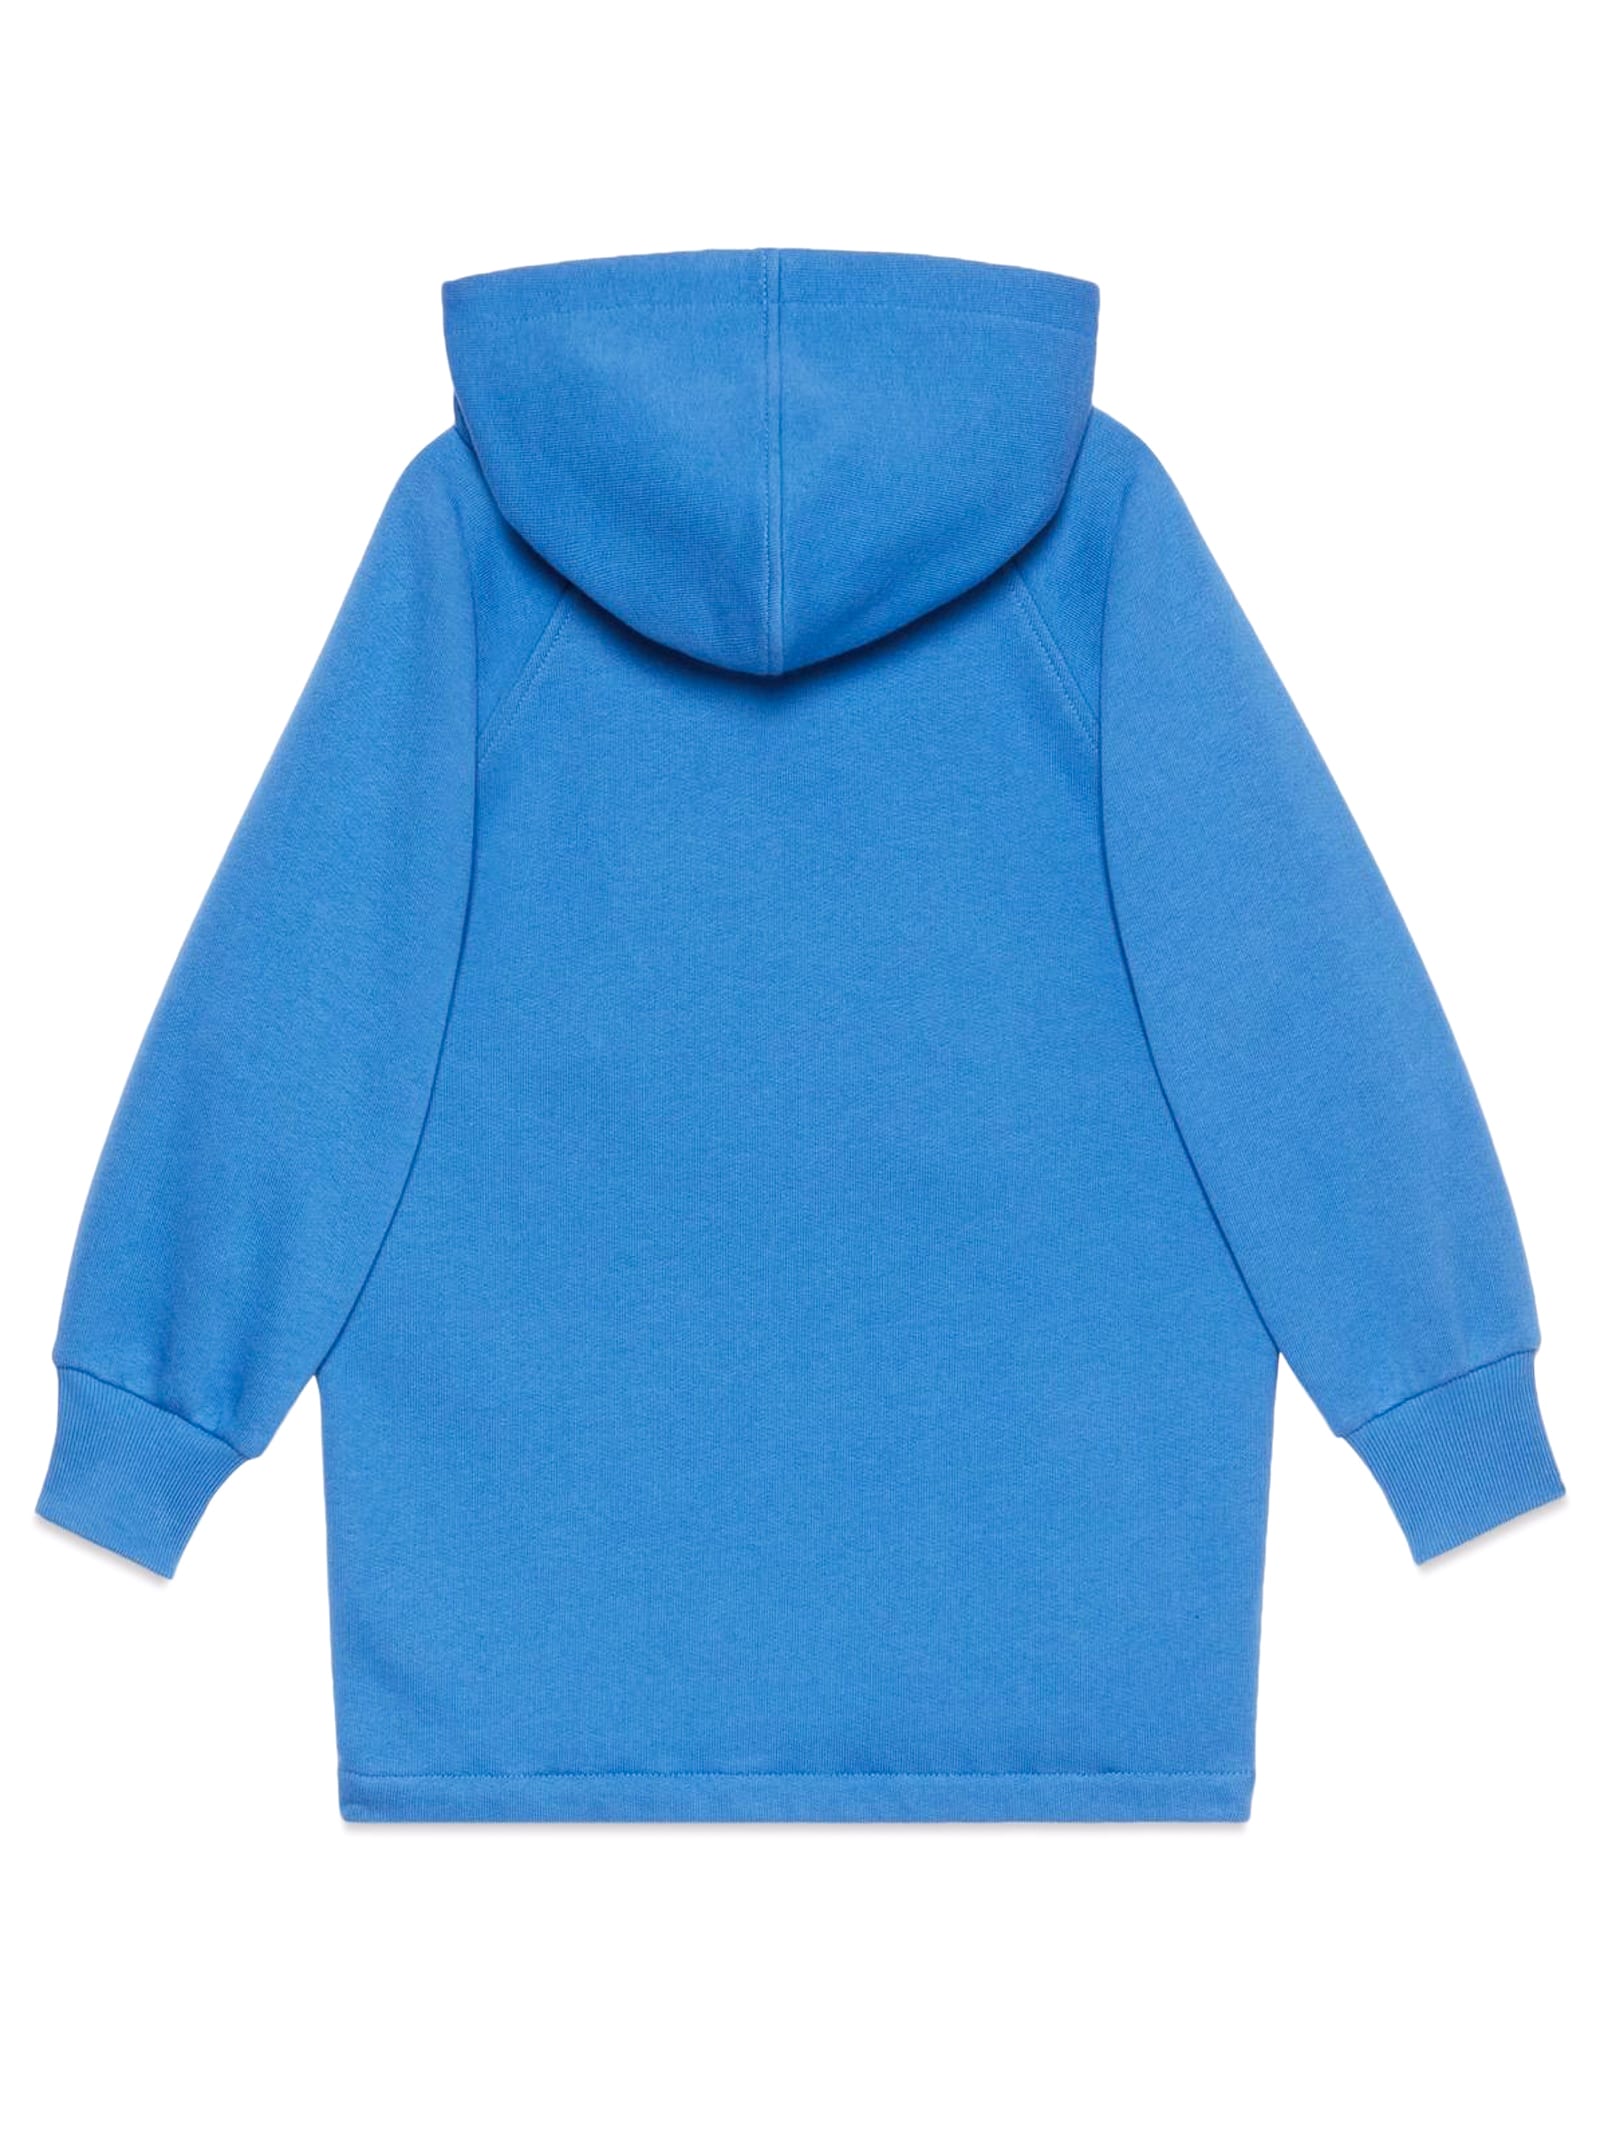 Shop Gucci Childrens Cotton Jacket With  Label In Light Blue